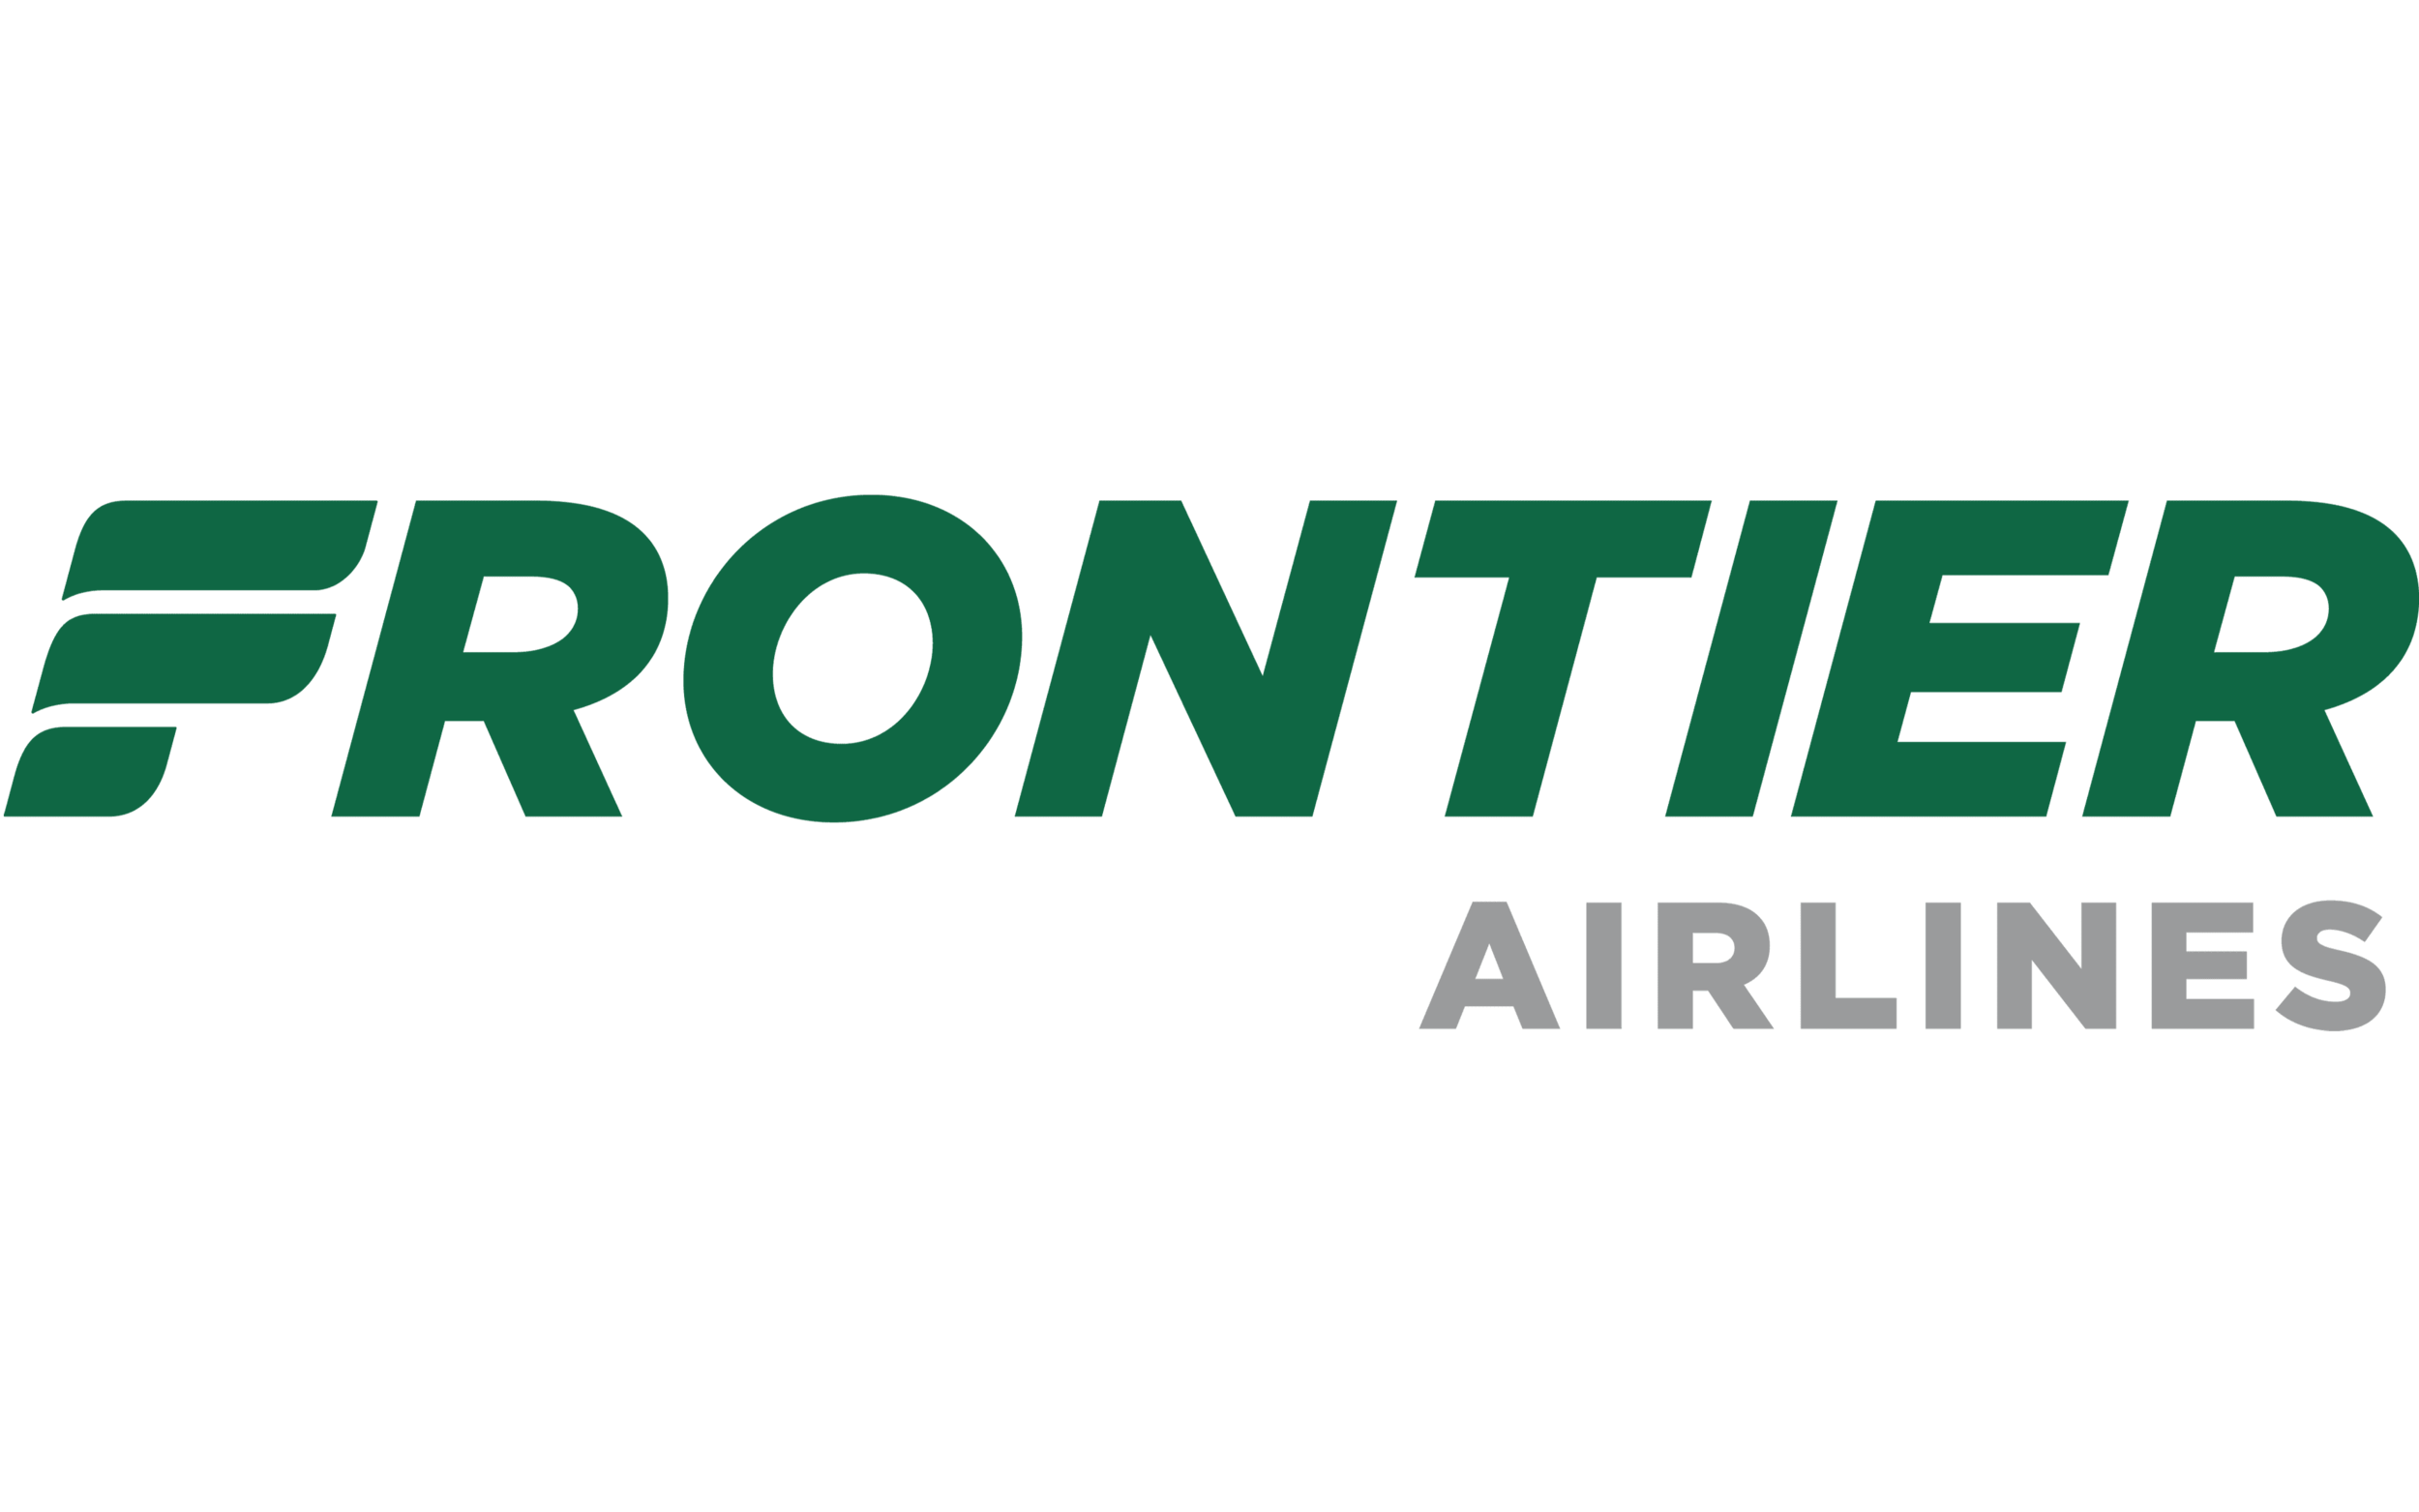 Frontier-Airlines-Logo.png